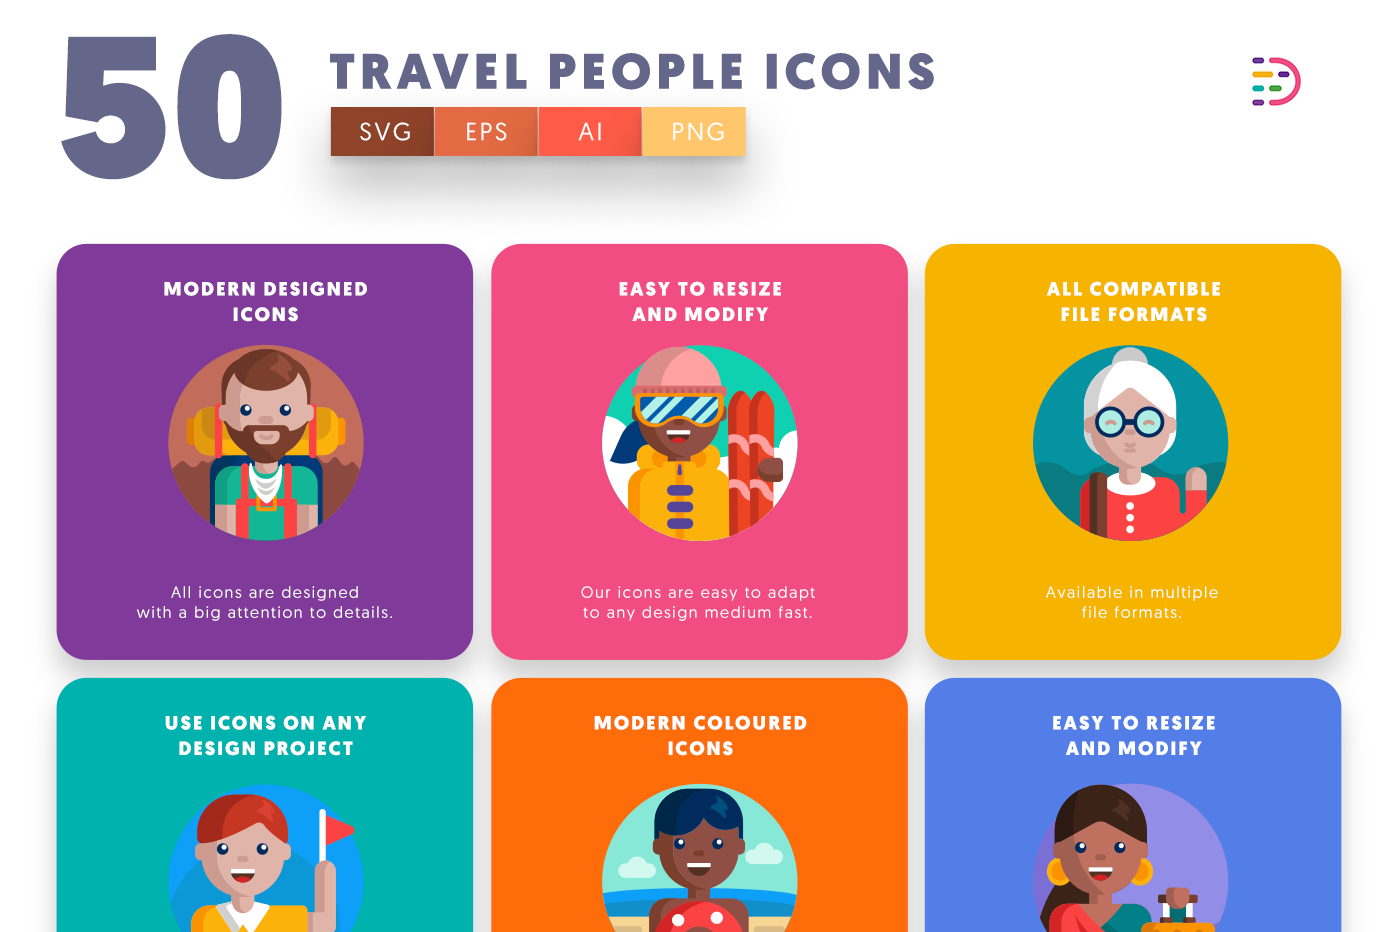 Full vector 50 Travel People Icons